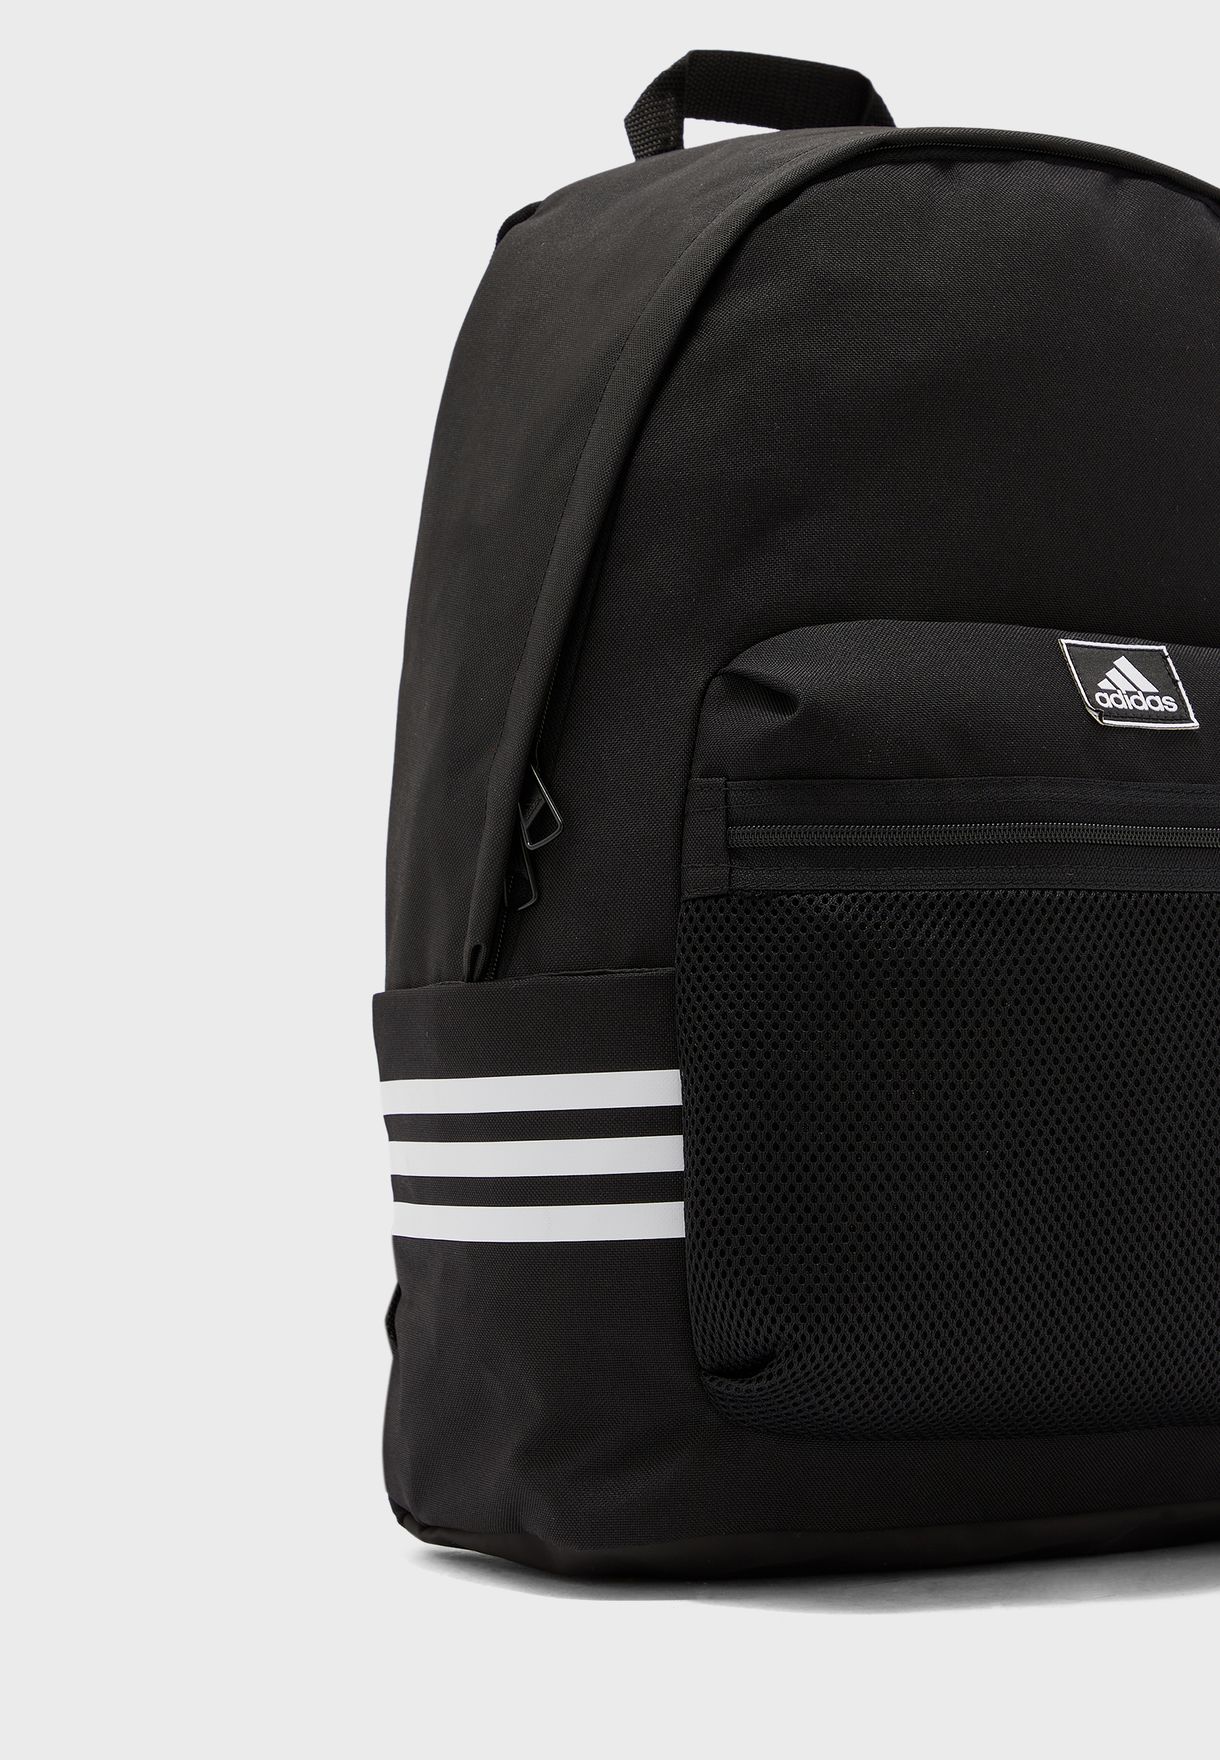 adidas back to school backpack